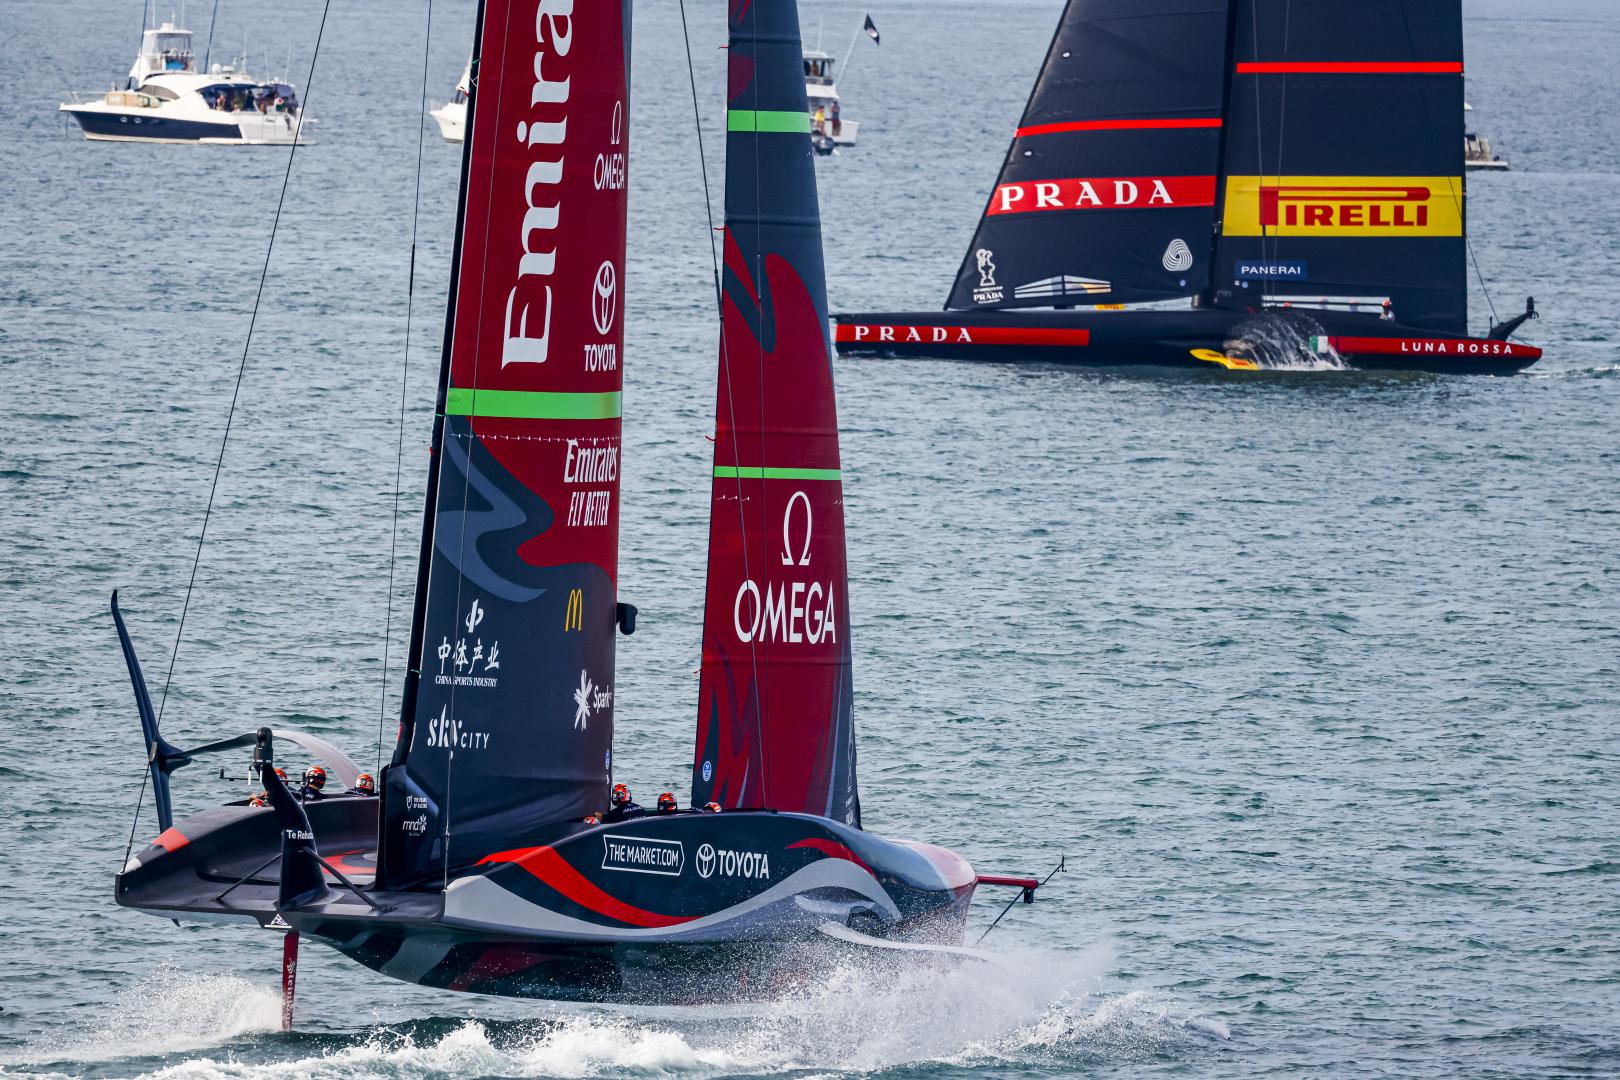 36th America’s Cup: the mental game becomes more intense